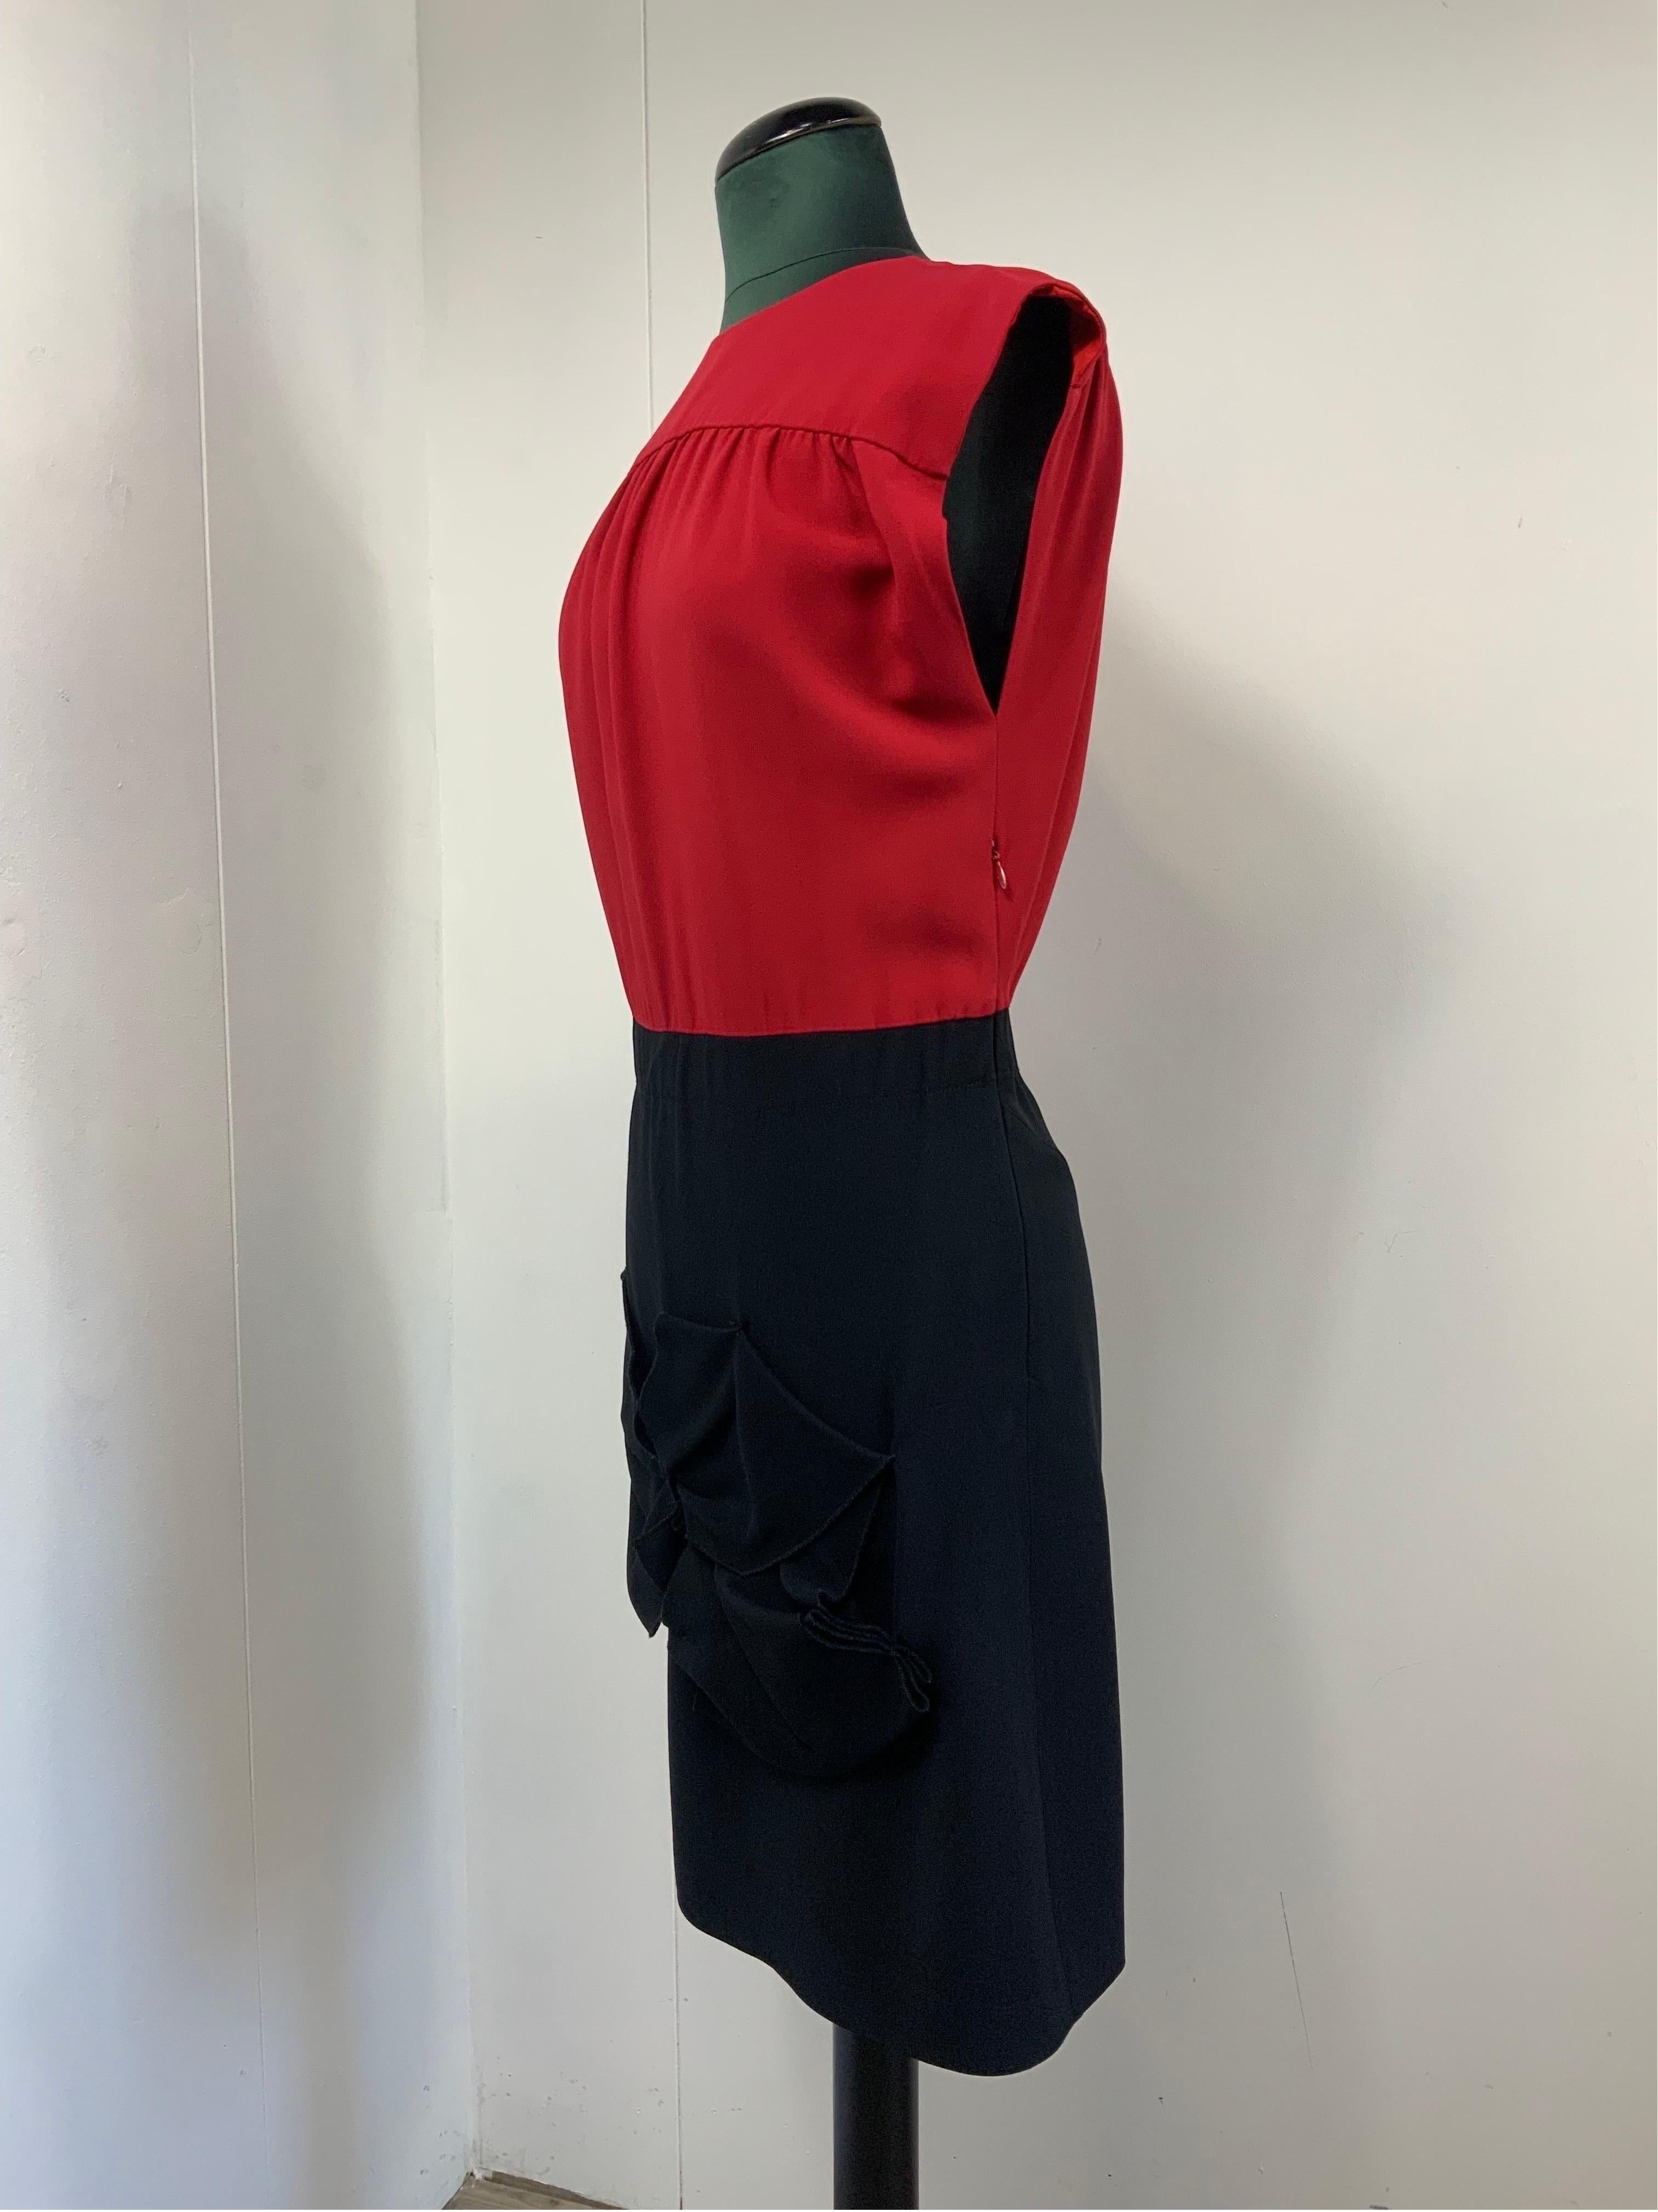 MIUMIU bicolor red and blue Dress For Sale 3